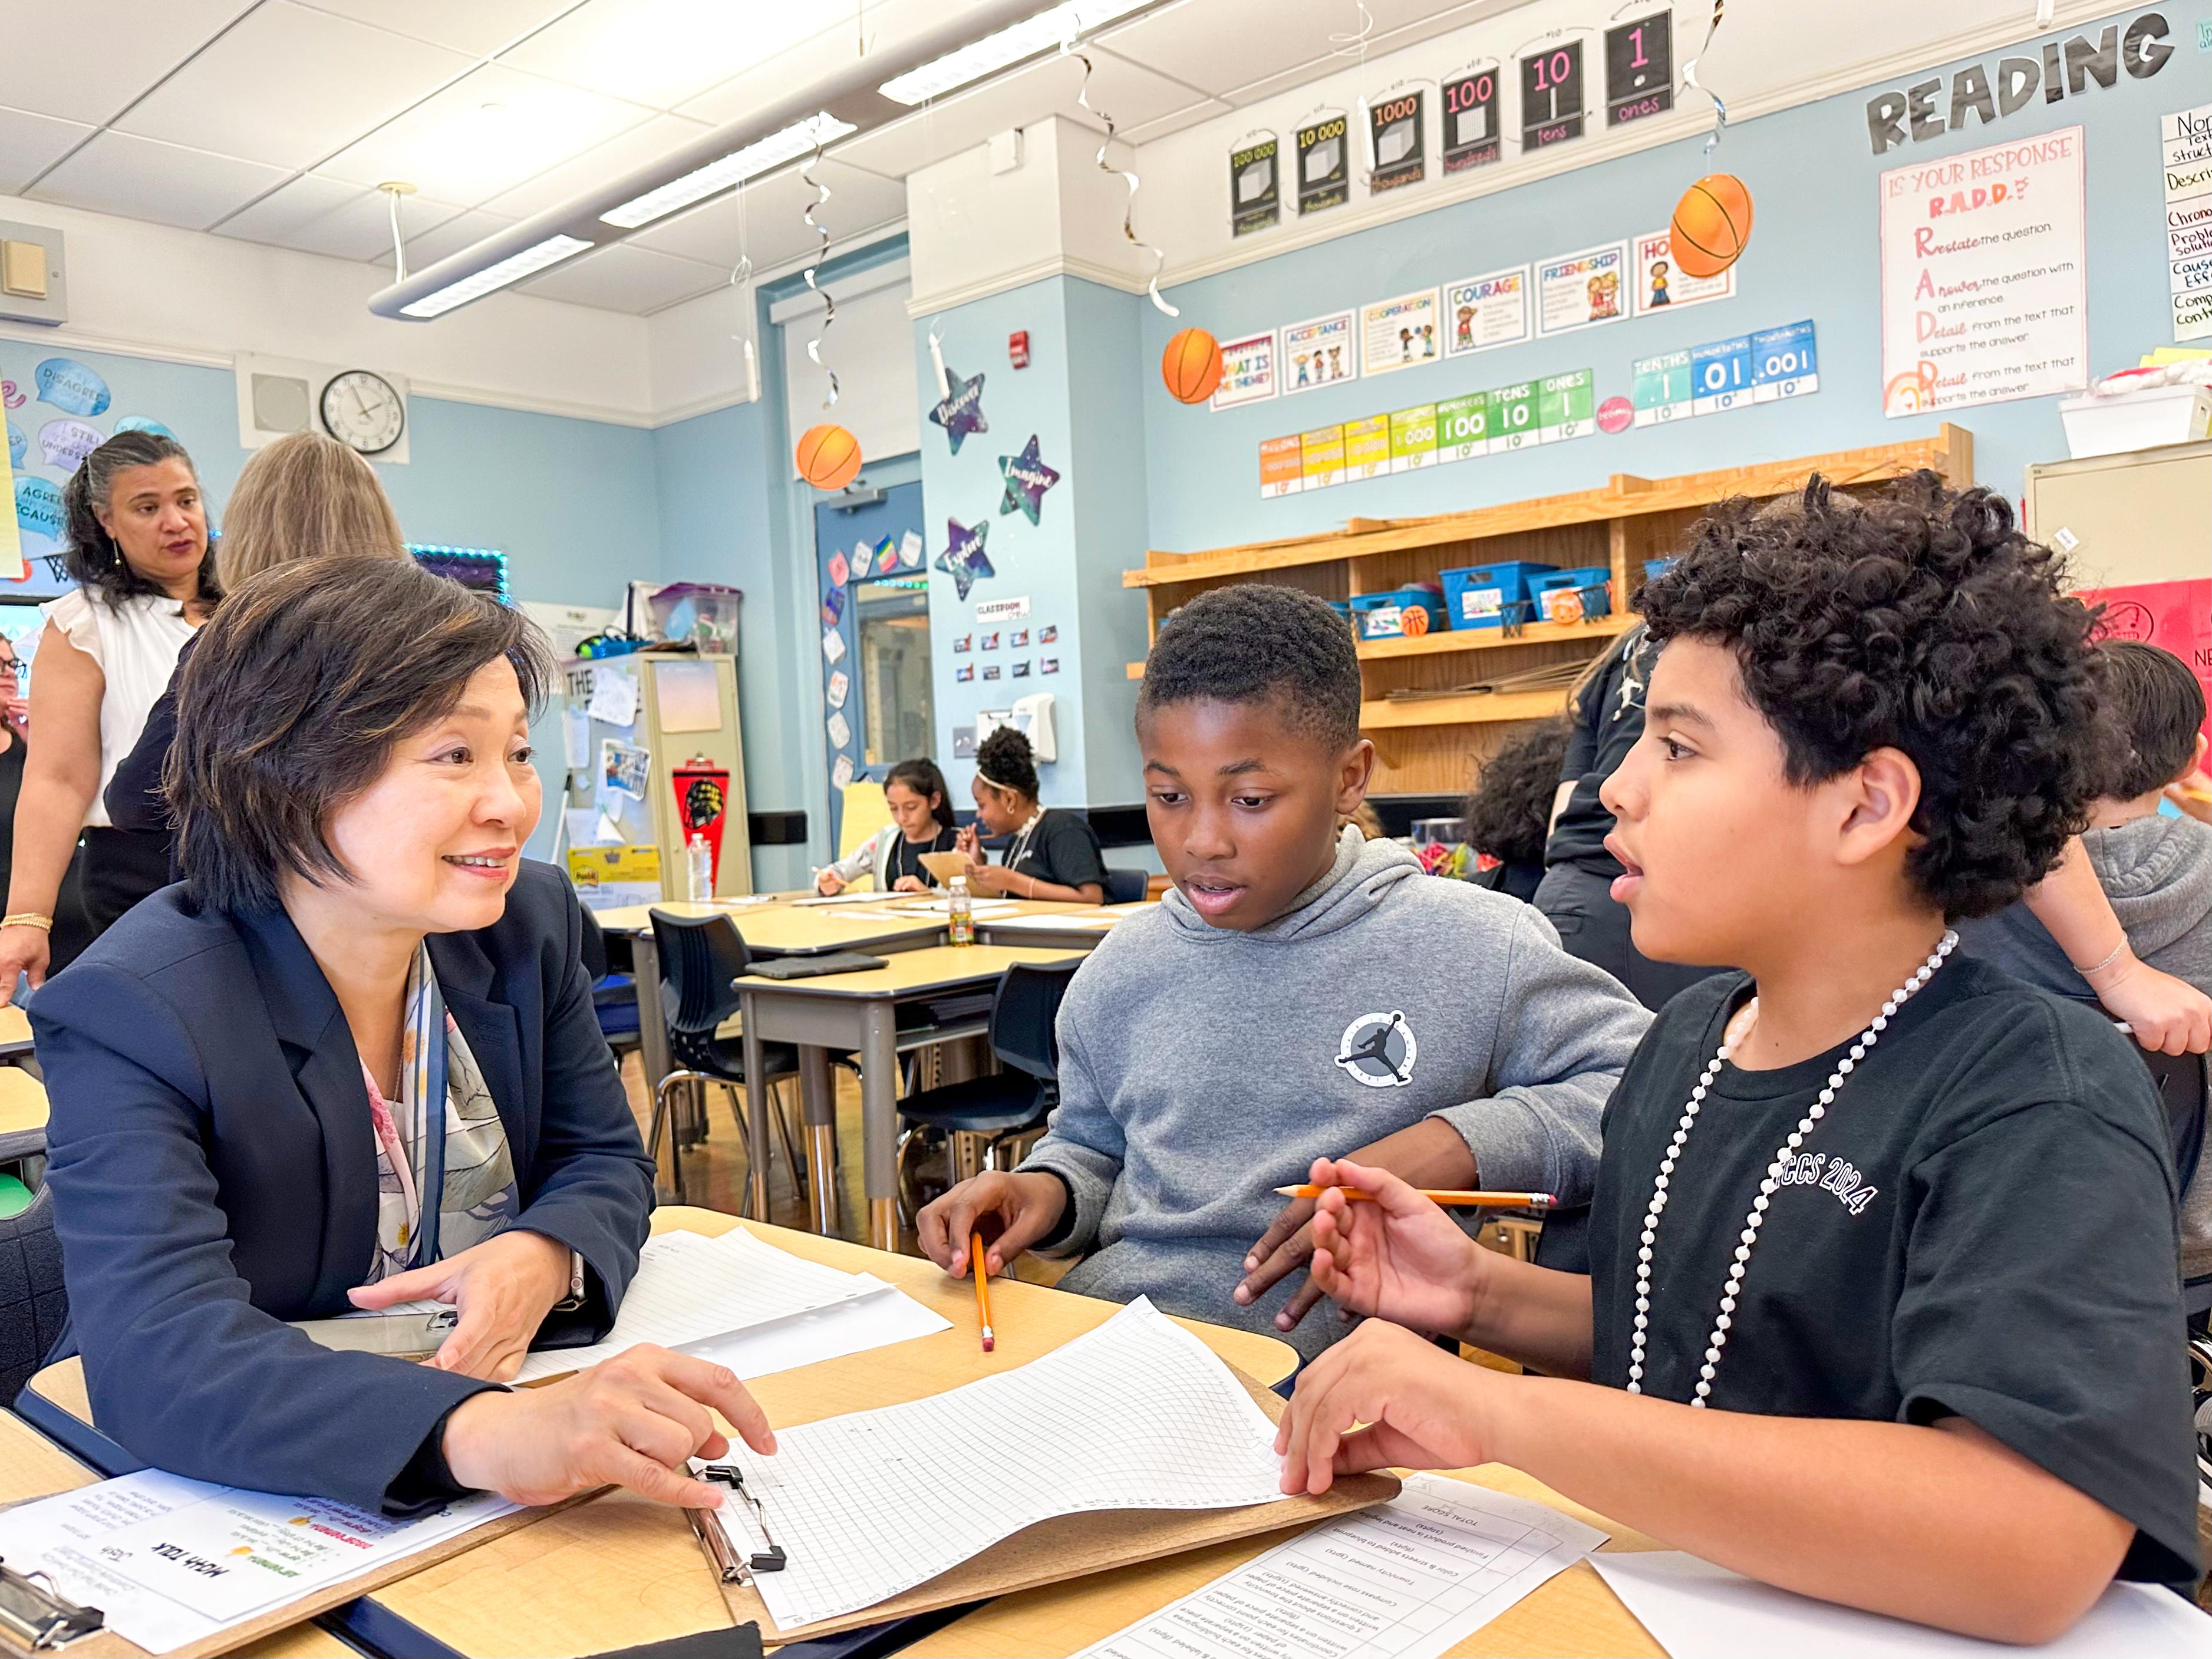 The Secretary for Education, Dr Choi Yuk-lin, visited Teachers College Community School in New York, the United States, on May 31 (New York time), to learn about the school's child-centred learning environment.